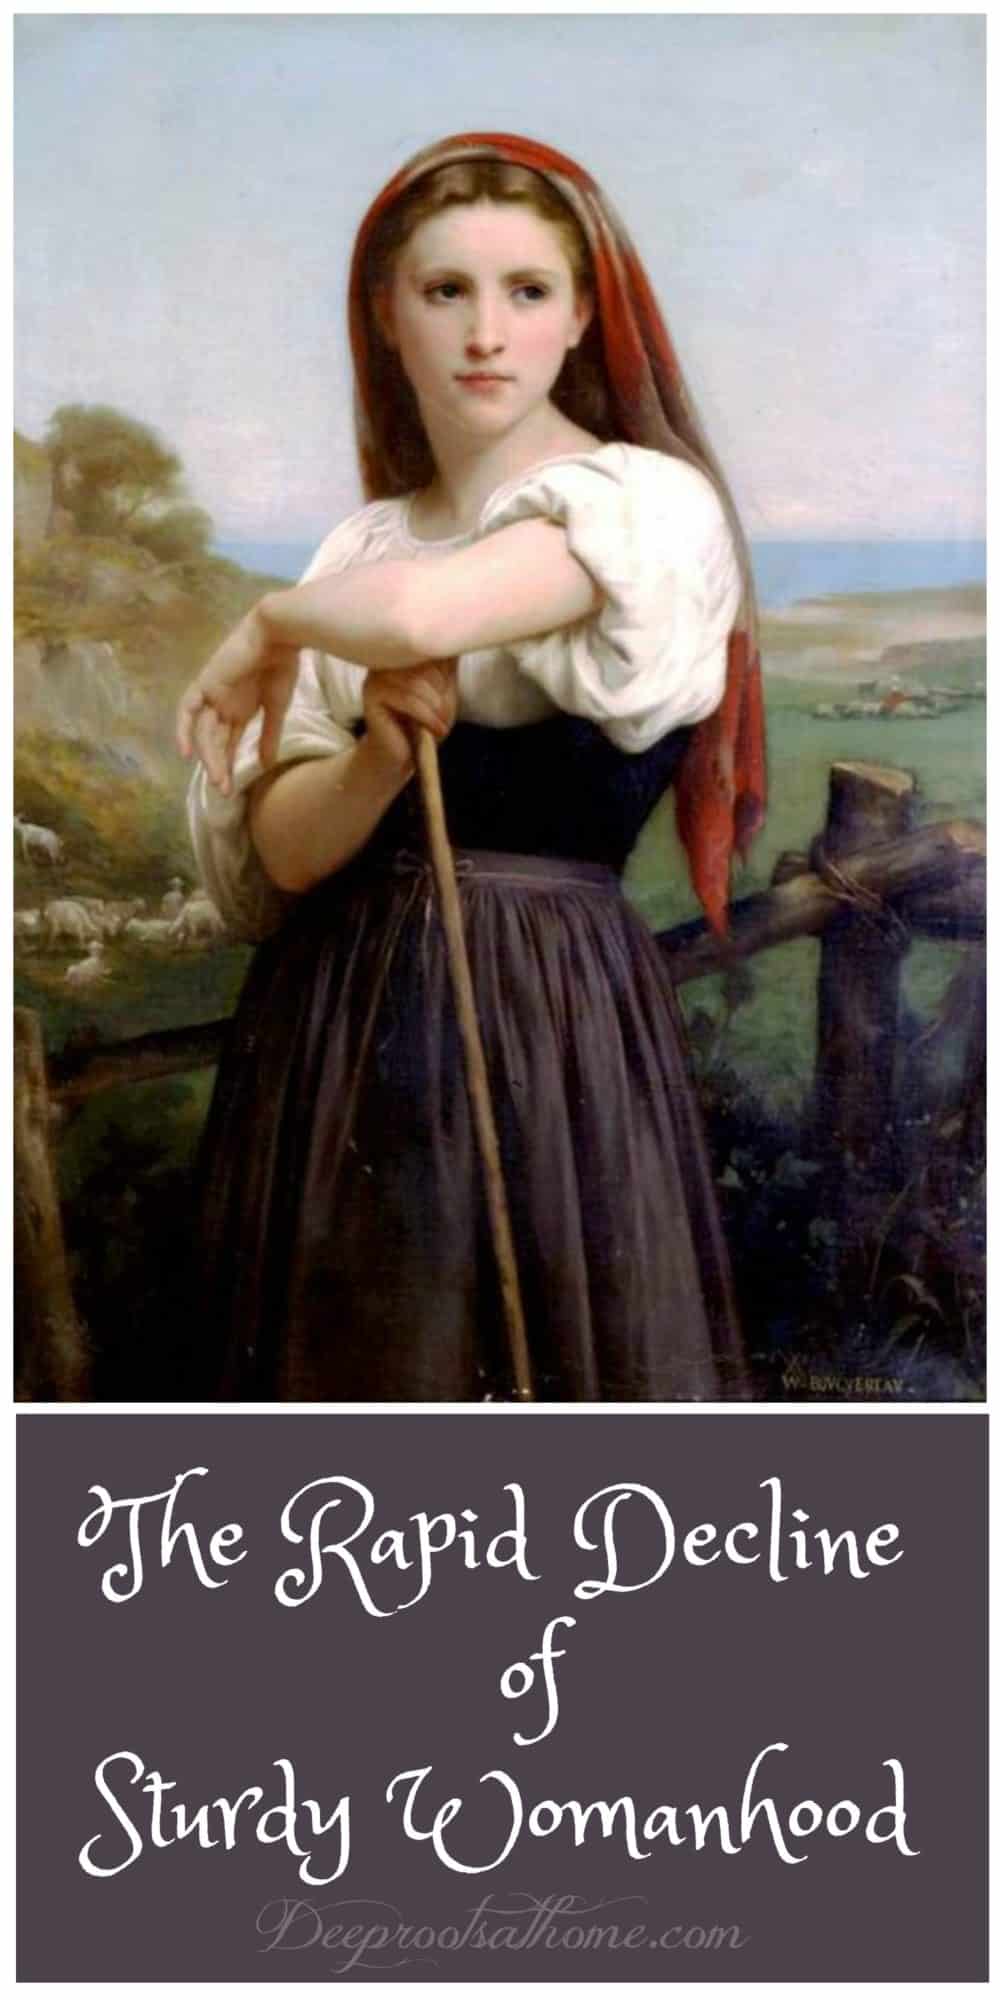 The Rapid Decline of Sturdy Womanhood. William-Adolphe Bouguereux, Young Shepherdess, 